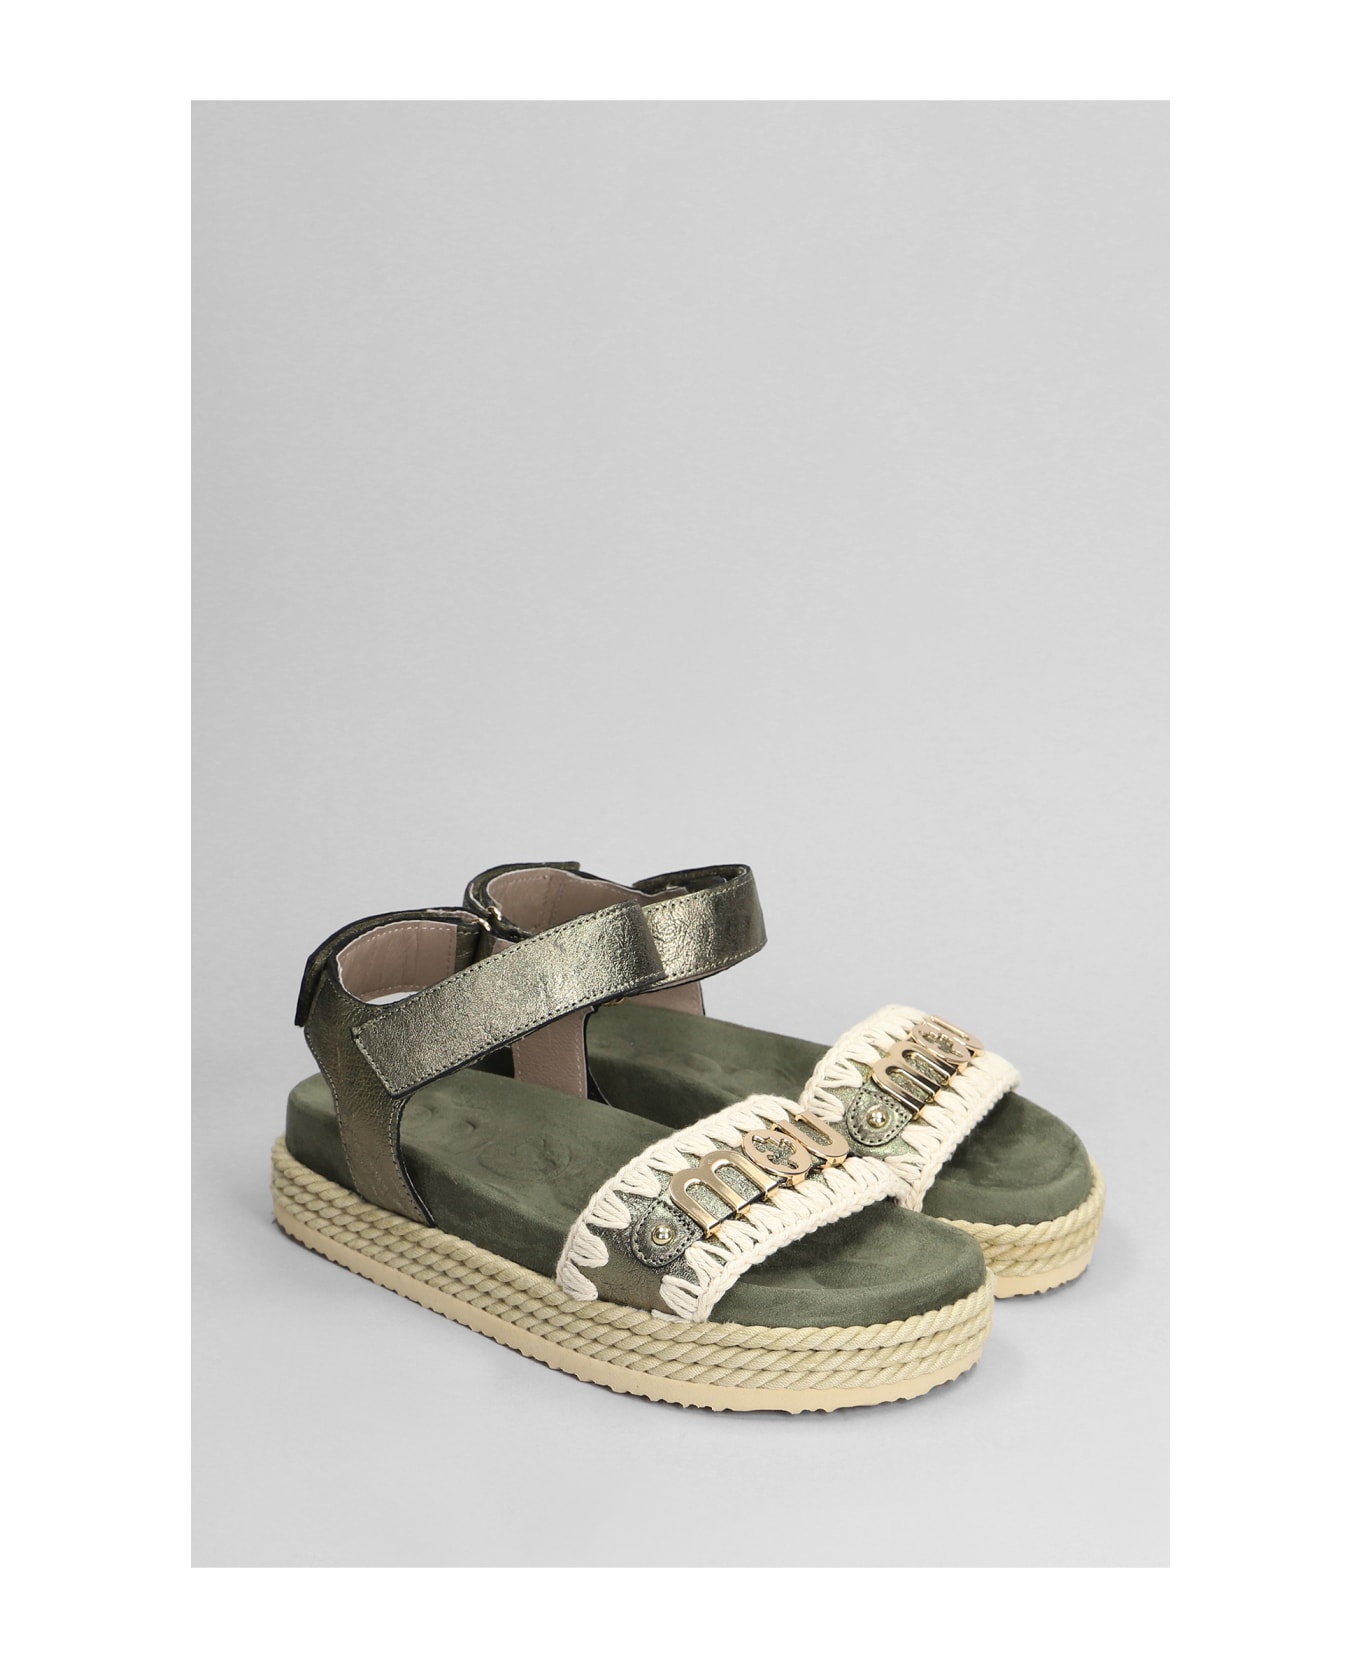 Mou Rope Bio Sandal Flats In Green Suede And Leather - green